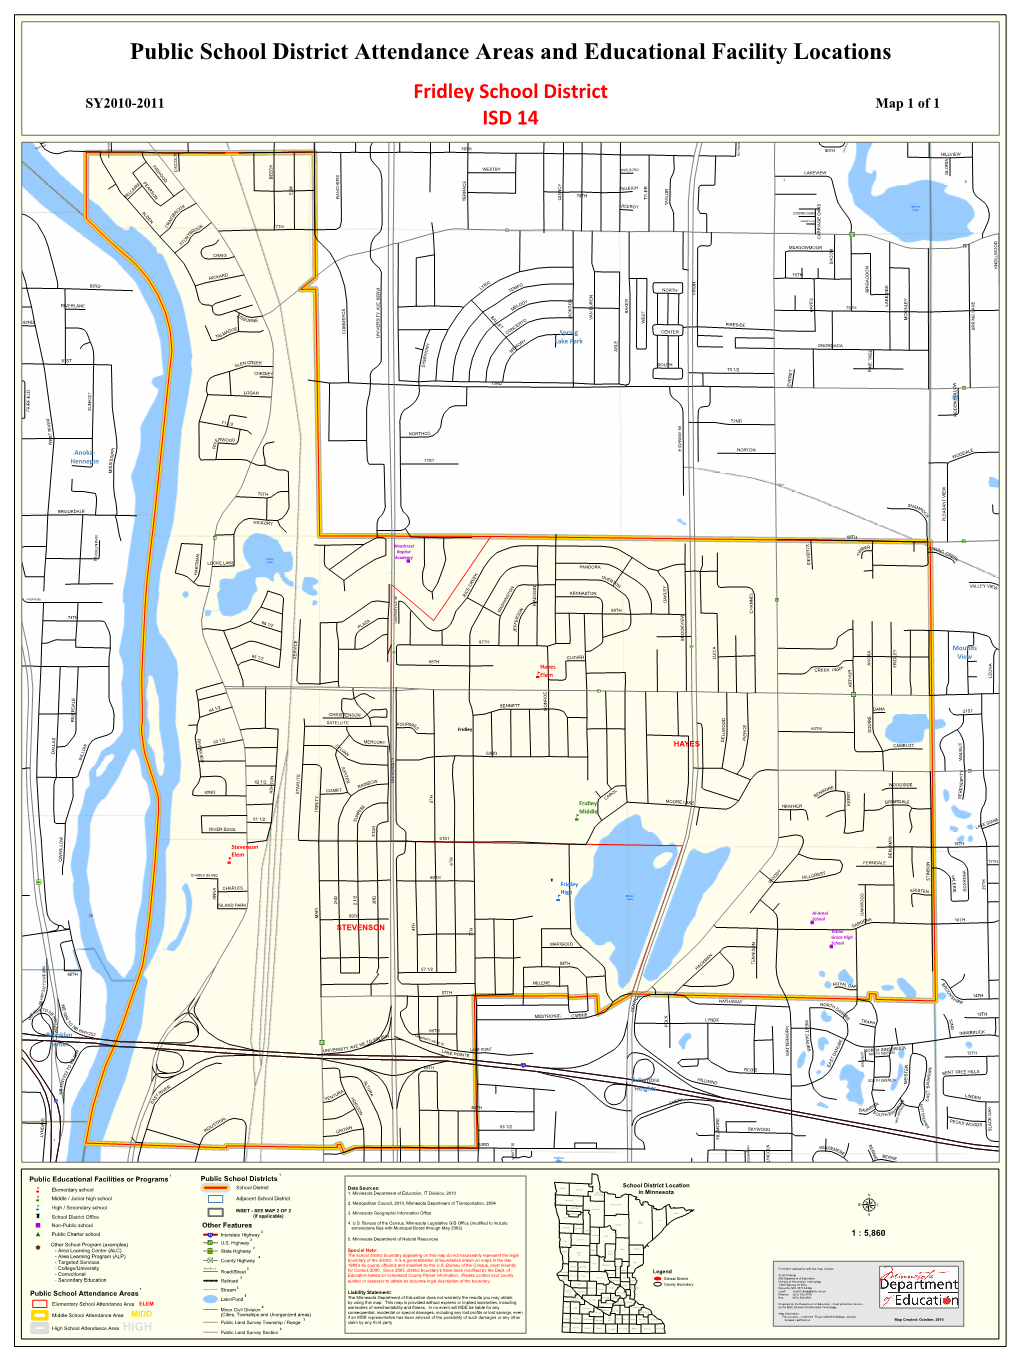 Public School District Attendance Areas and Educational Facility Locations Fridley School District SY2010-2011 Map 1 of 1 ISD 14